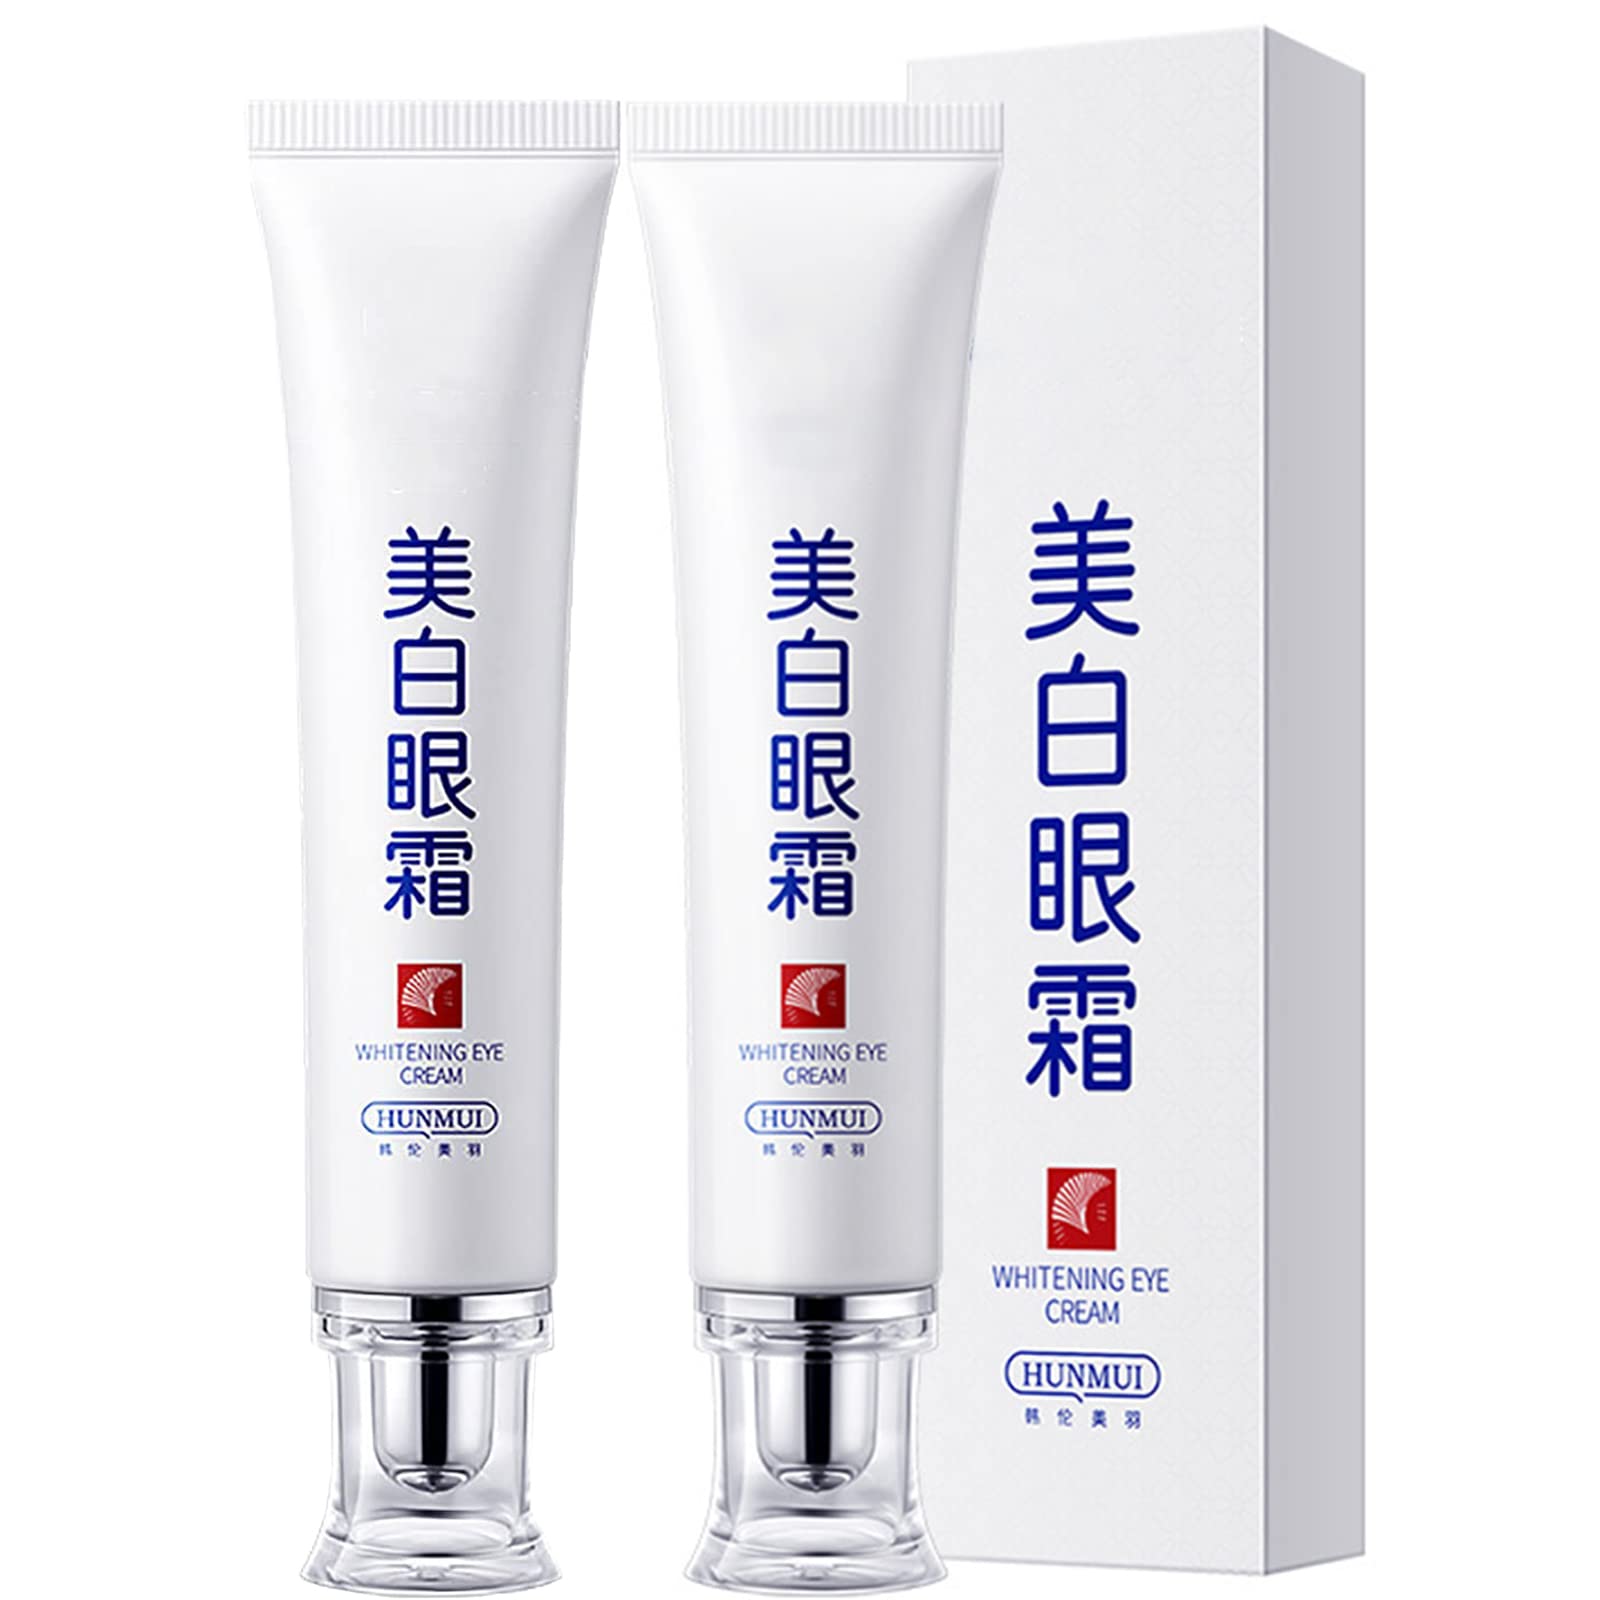 Firming Anti Wrinkle Whitening Eye Cream, Temporary Firming Eye Cream Instant Lifting, Anti Aging Eye Cream for Dark Circles and Puffiness, Instant Remove Eye Bags (2pcs)